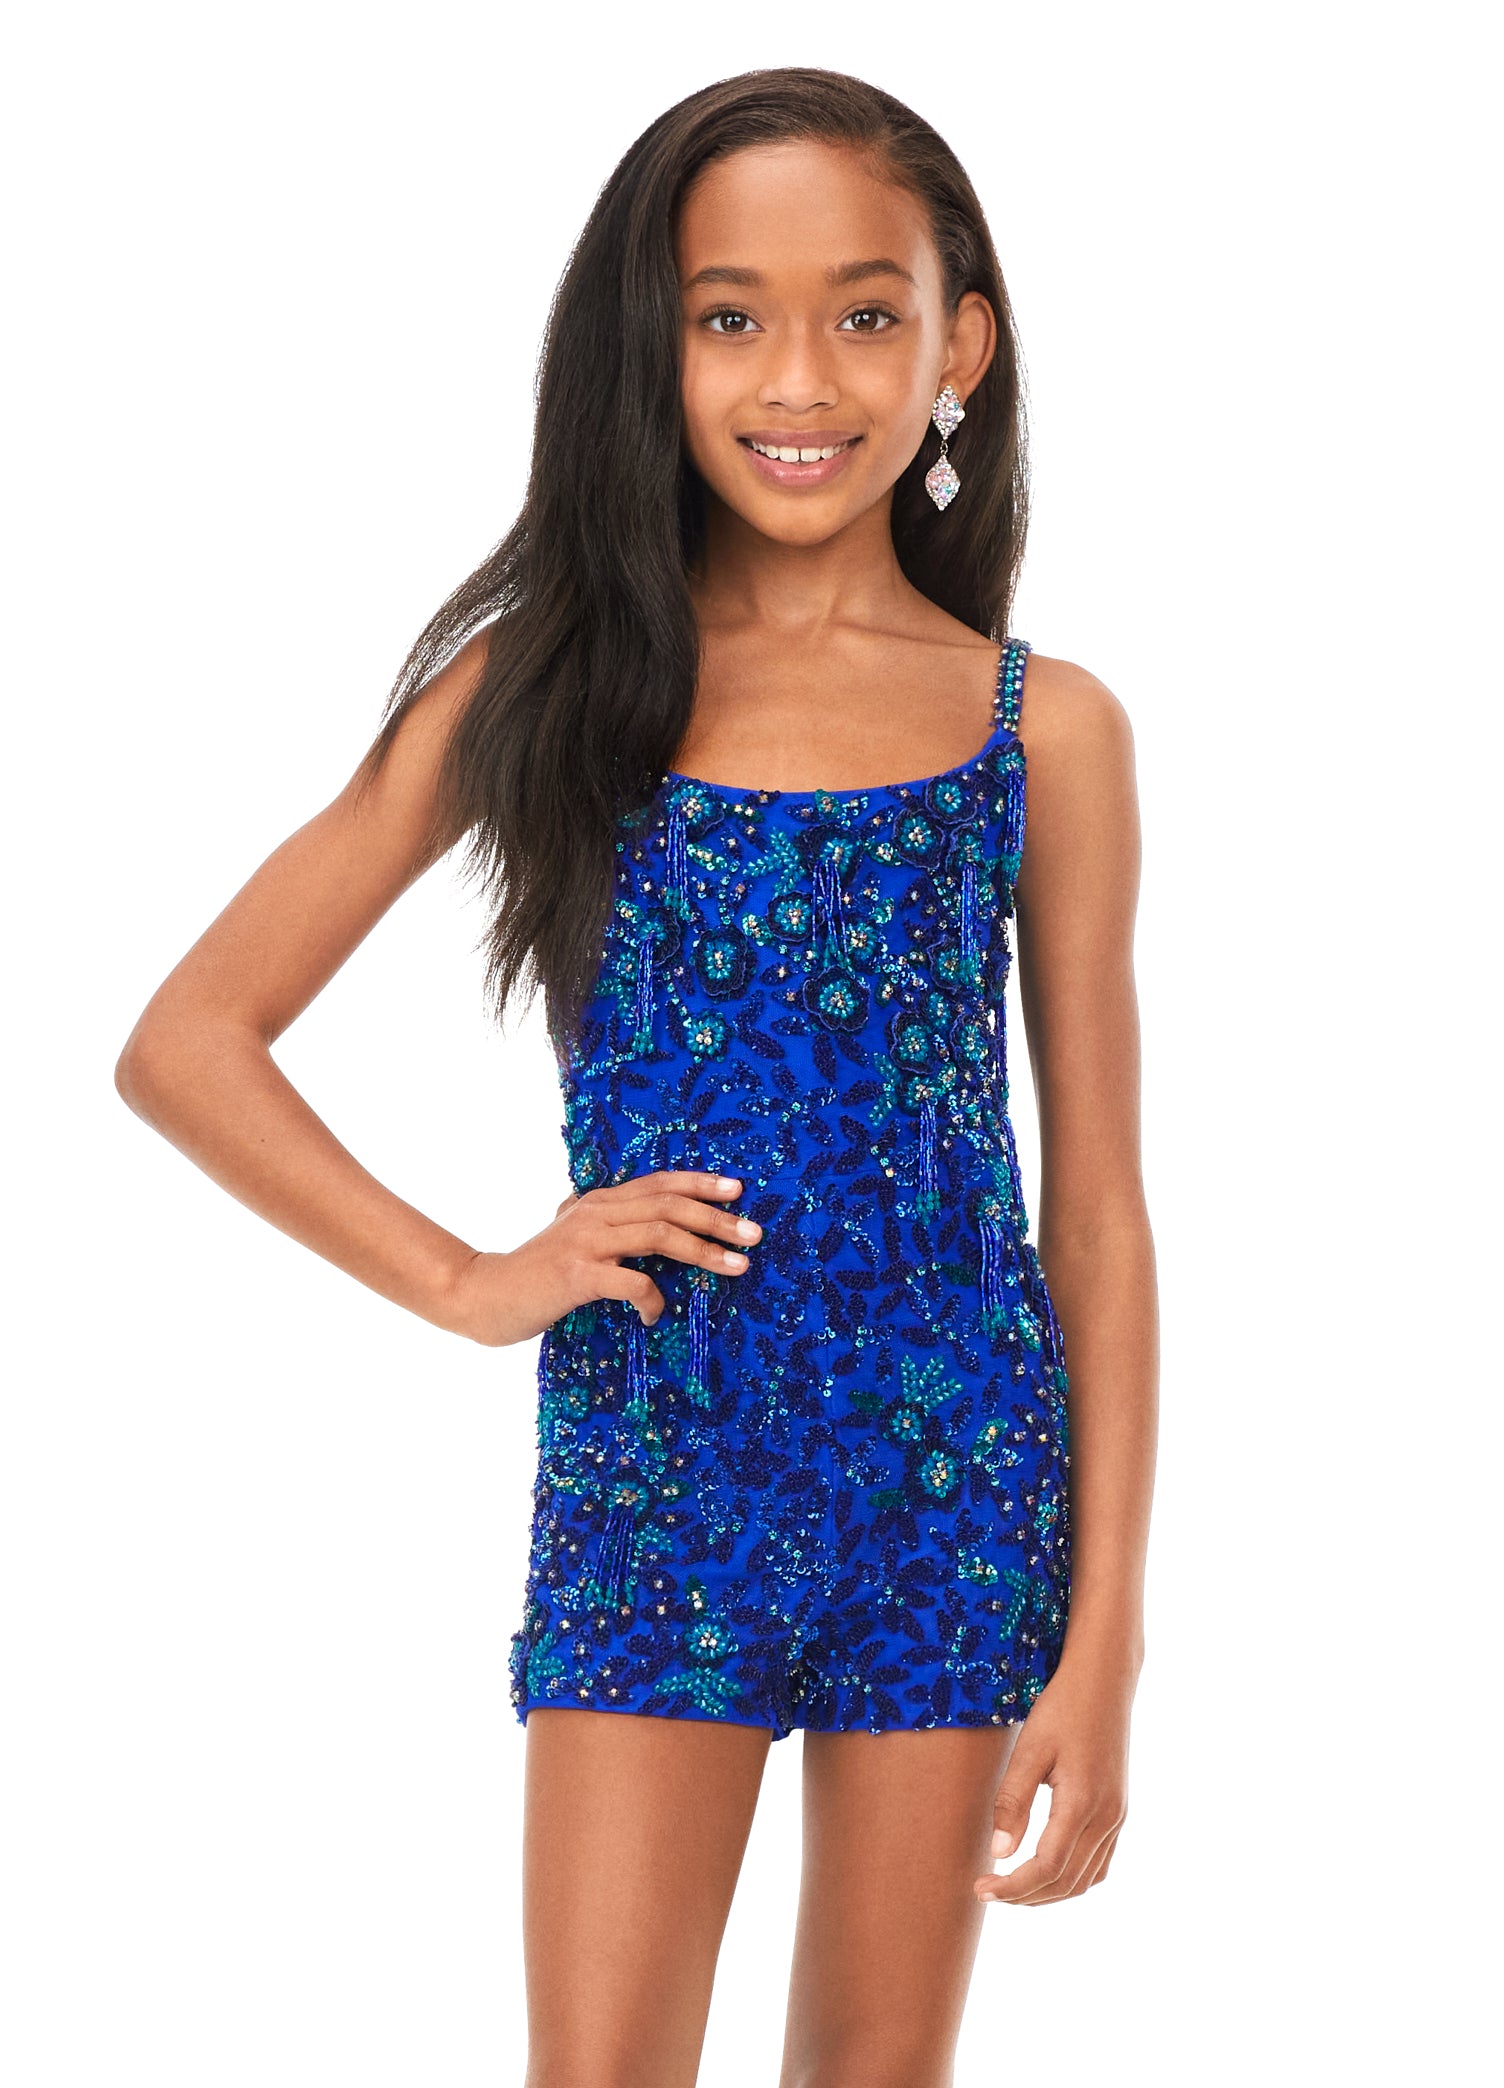 Ashley Lauren Kids 8186 Girls Beaded Romper with Fringe  This kids romper features a scoop neckline with spaghetti straps. The beaded romper is embellished with scattered 3-dimensional beaded appliques with fringe throughout.